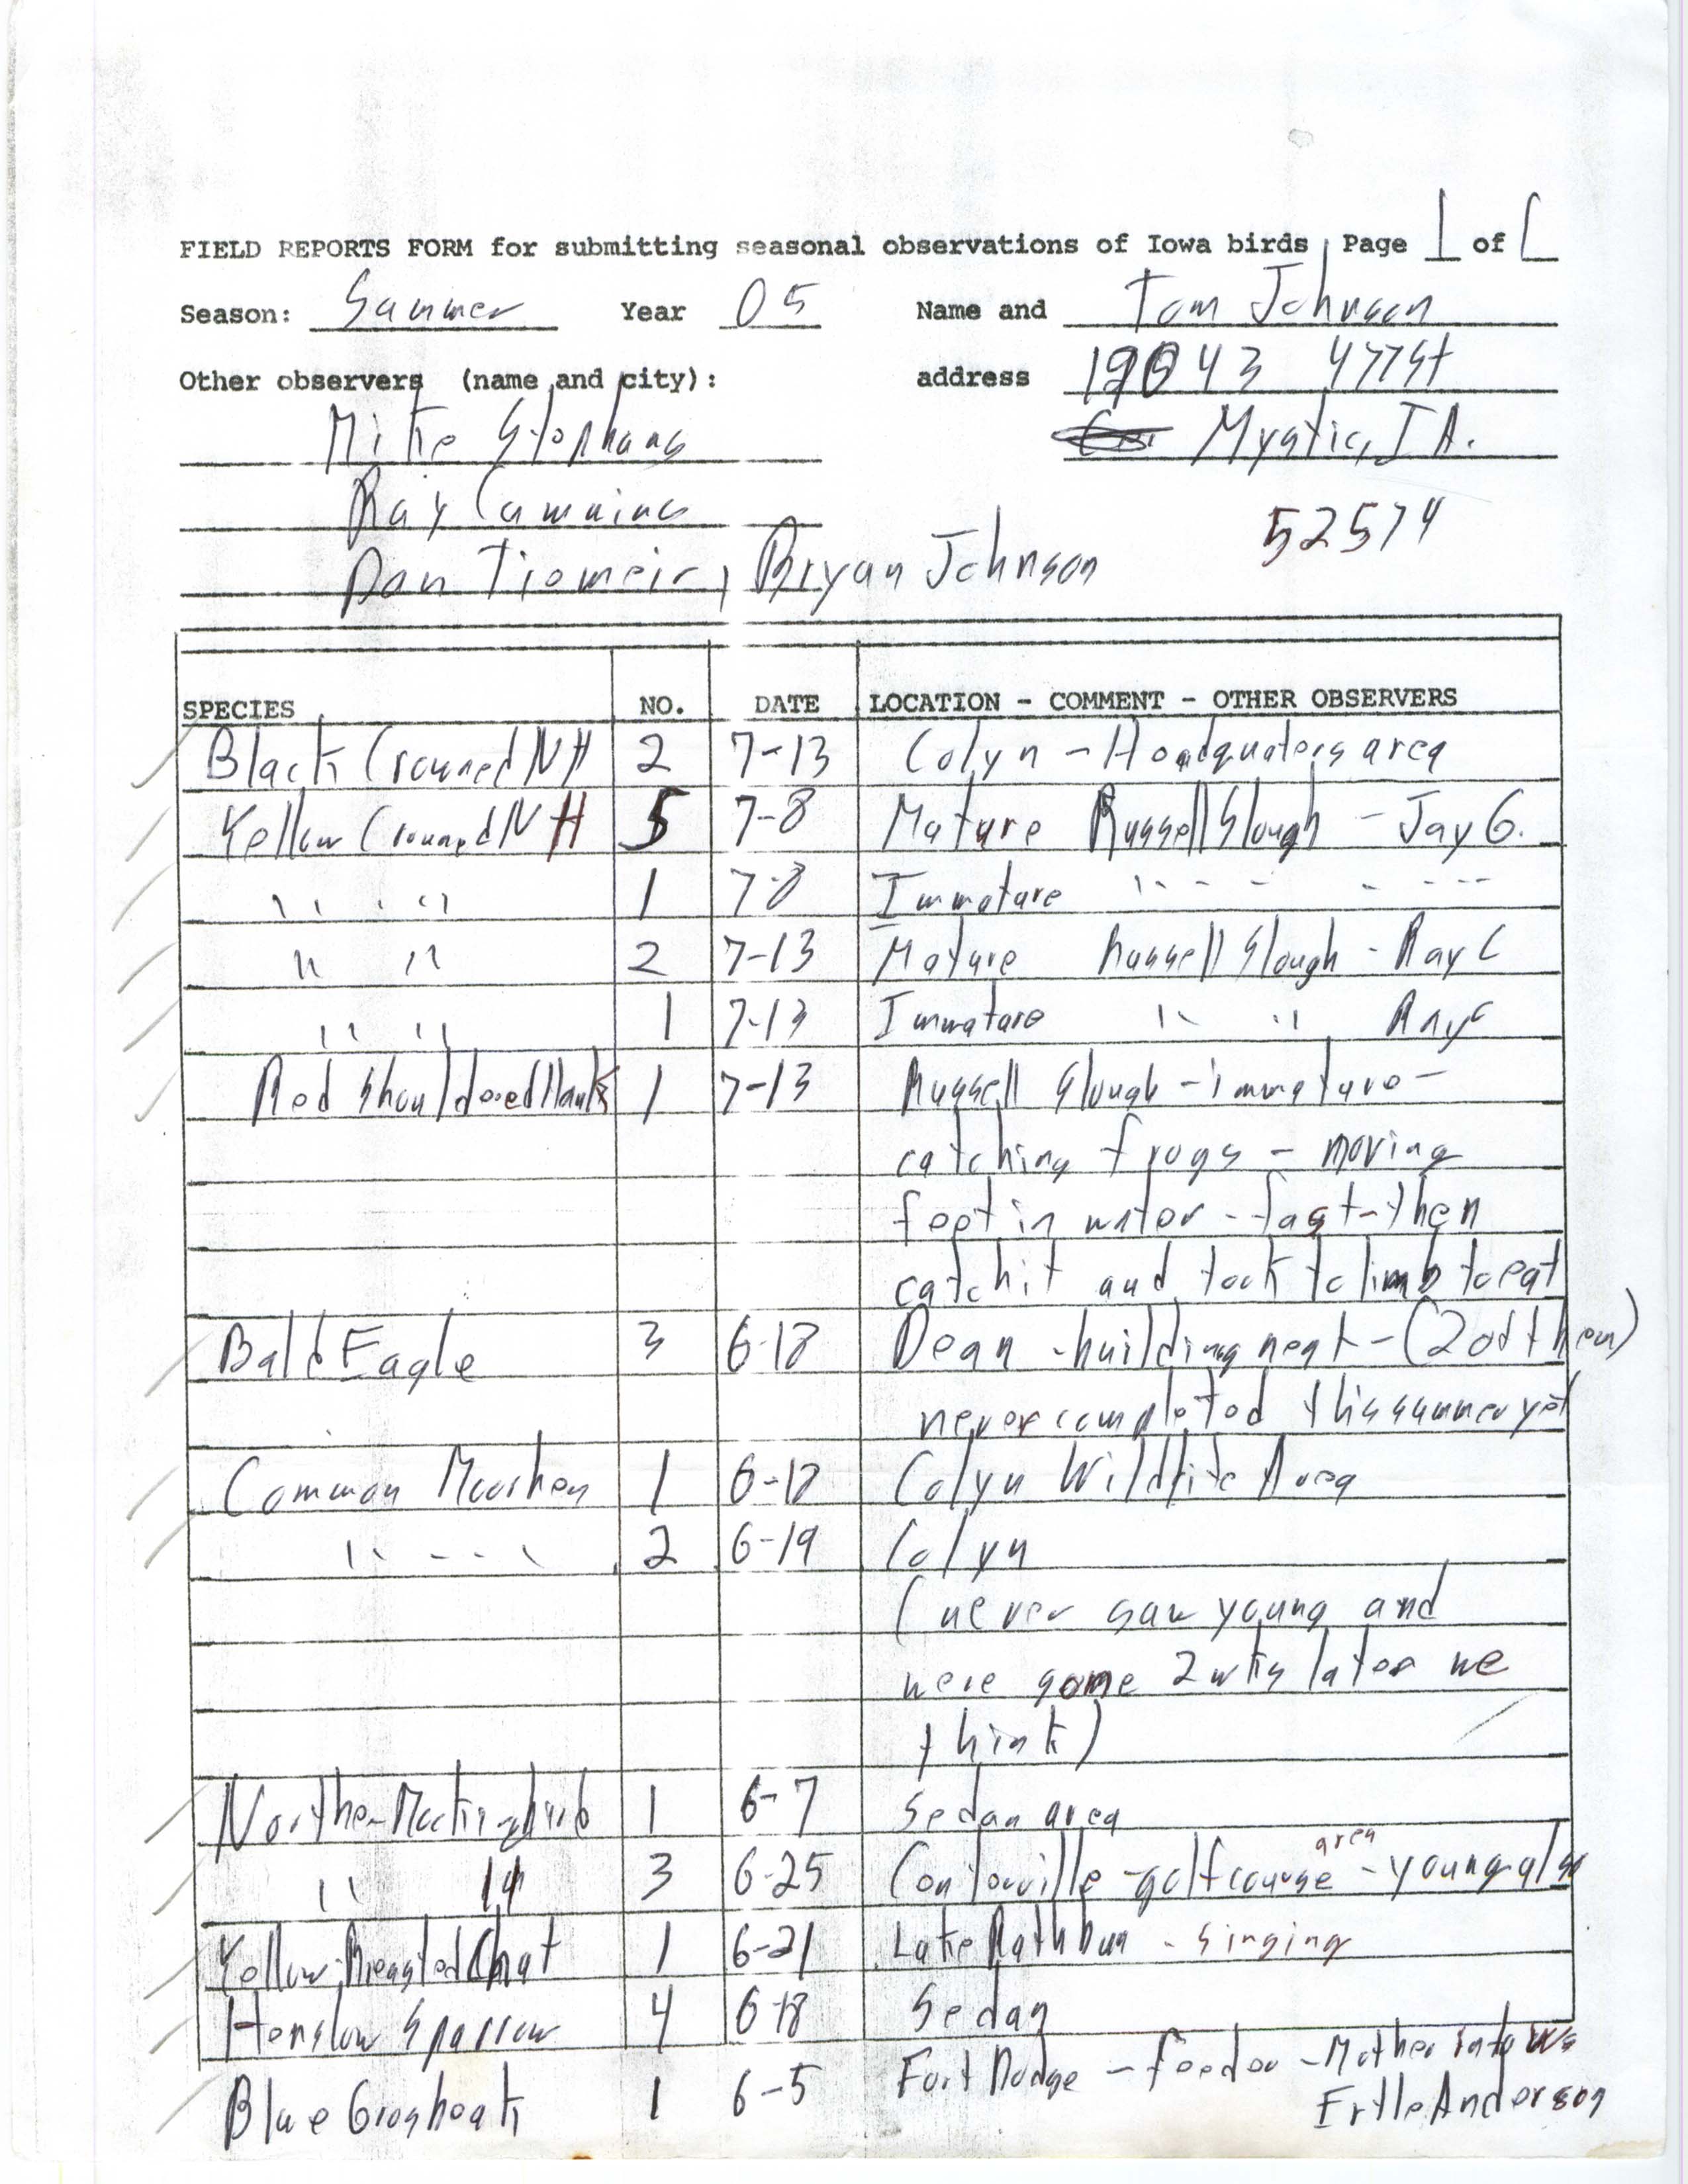 Field reports form for submitting seasonal observations of Iowa birds, Thomas N. Johnson, summer 2005